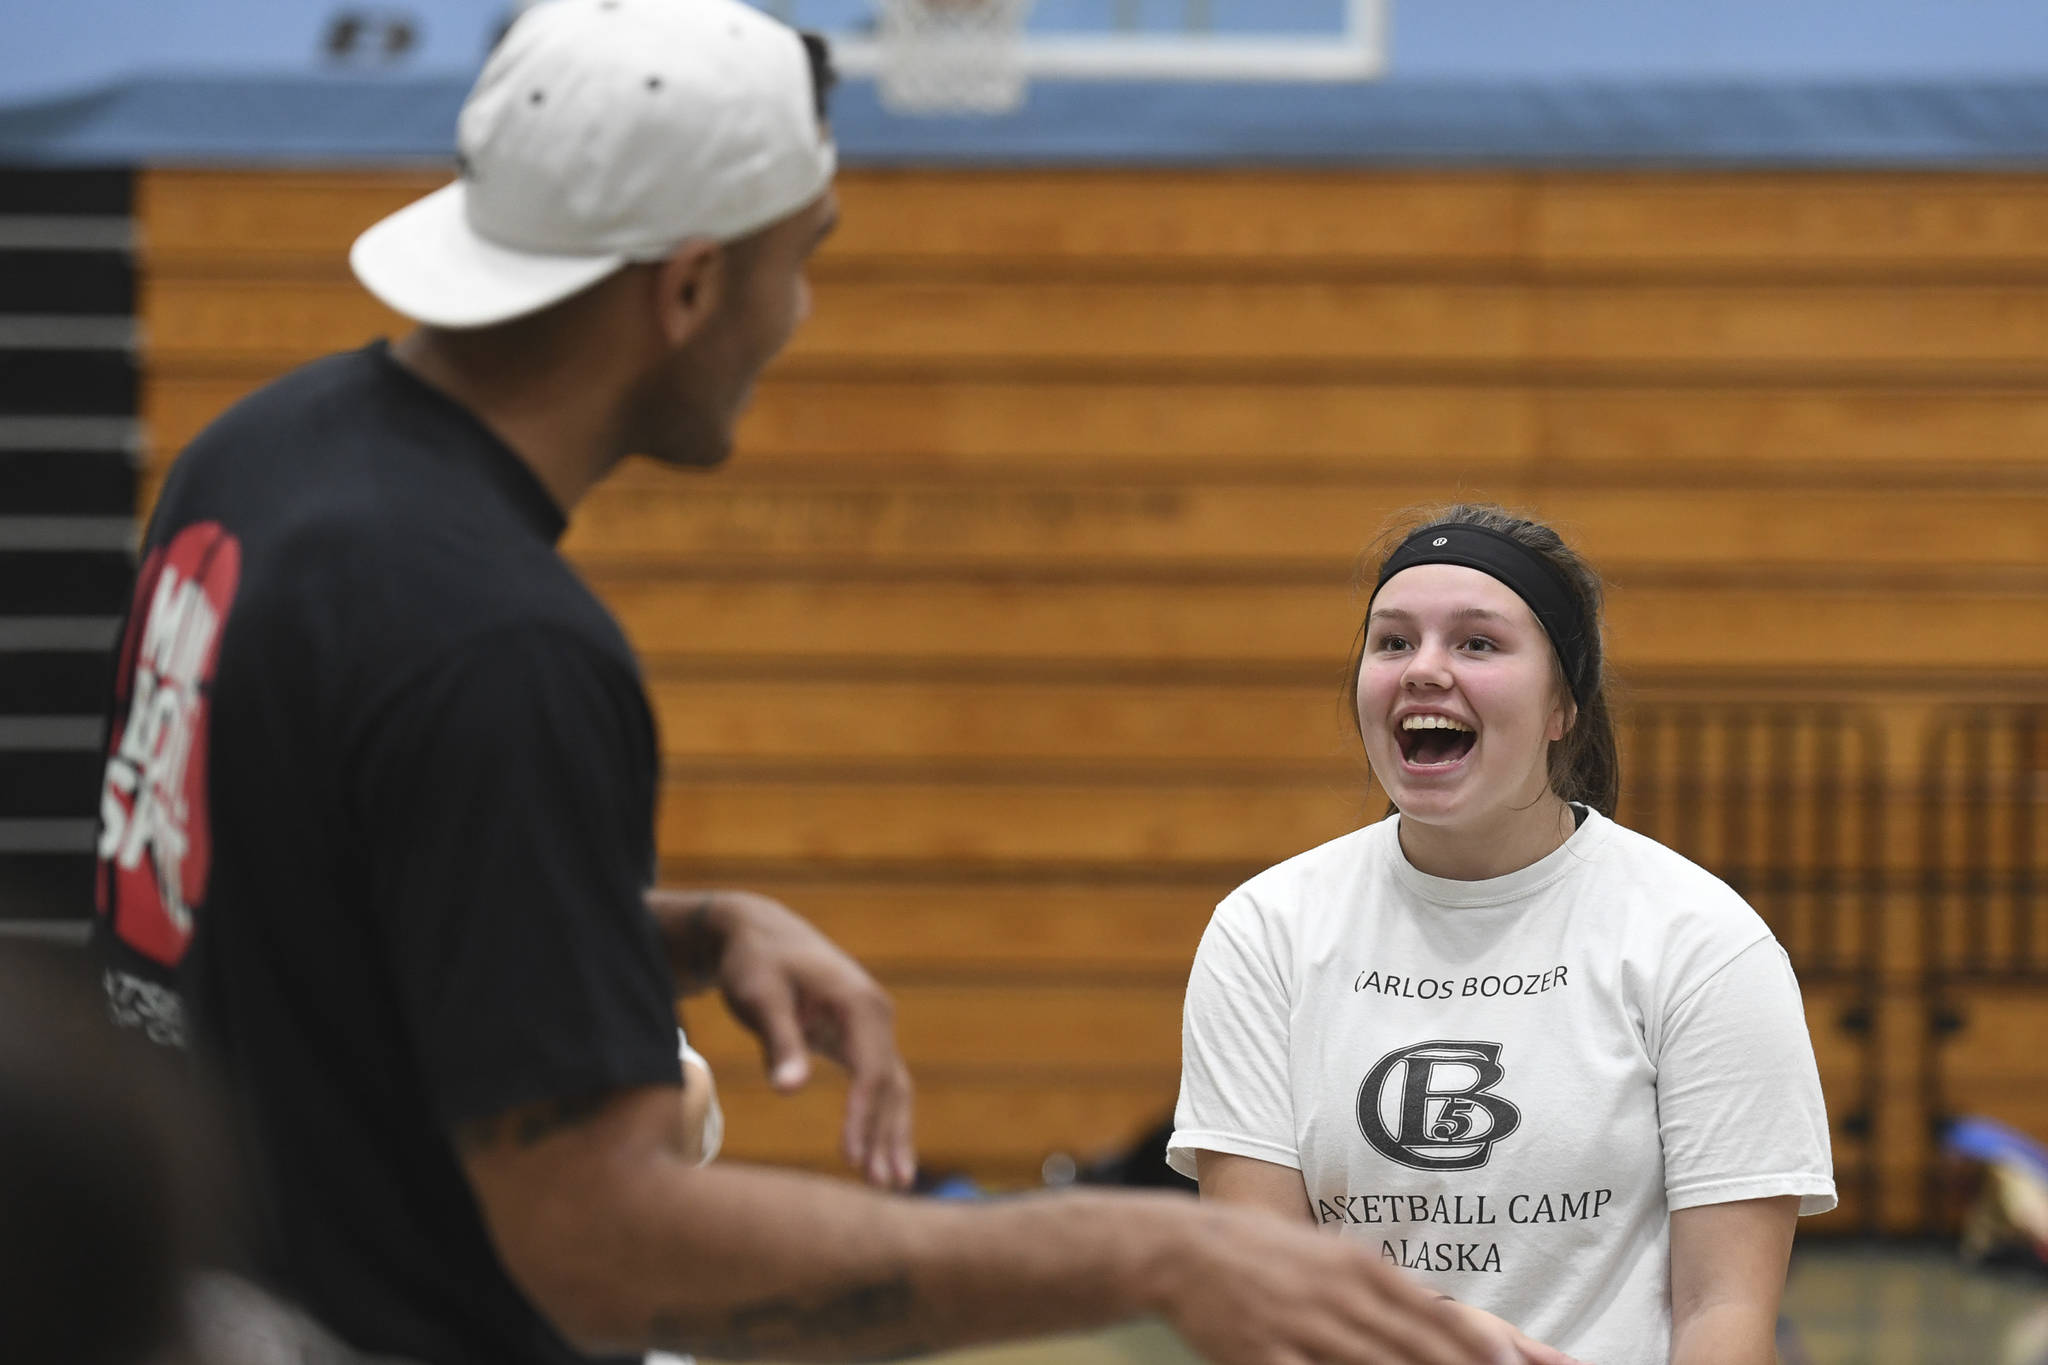 Student Kaia Smith, 15, practices her Haida language with former professional basketball player Damen Bell-Holter during the Latseen Hoop Camp at Dzantak’i Heeni Middle School on Monday, July 29, 2019. The camp runs all week for students entering grades 6-12. (Michael Penn | Juneau Empire)